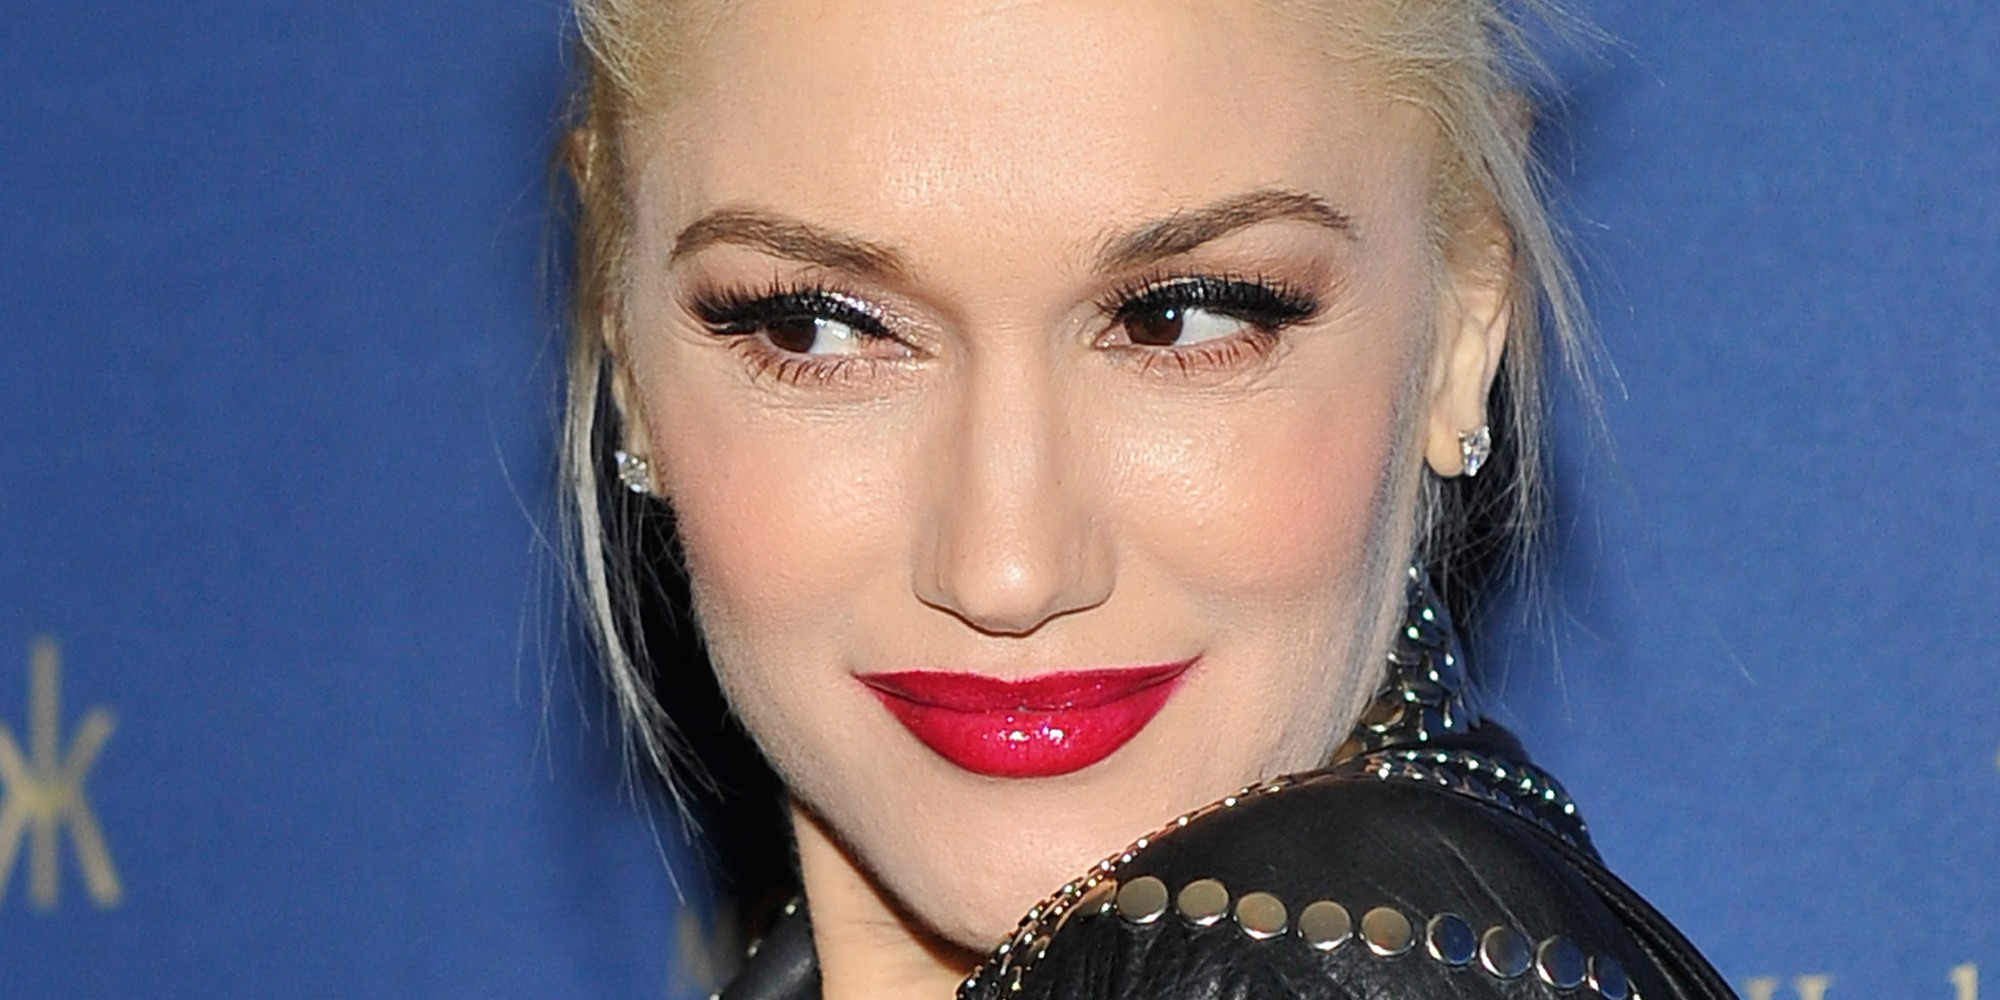 There's No Doubt: Gwen Stefani Will Join 'The Voice' | HuffPost